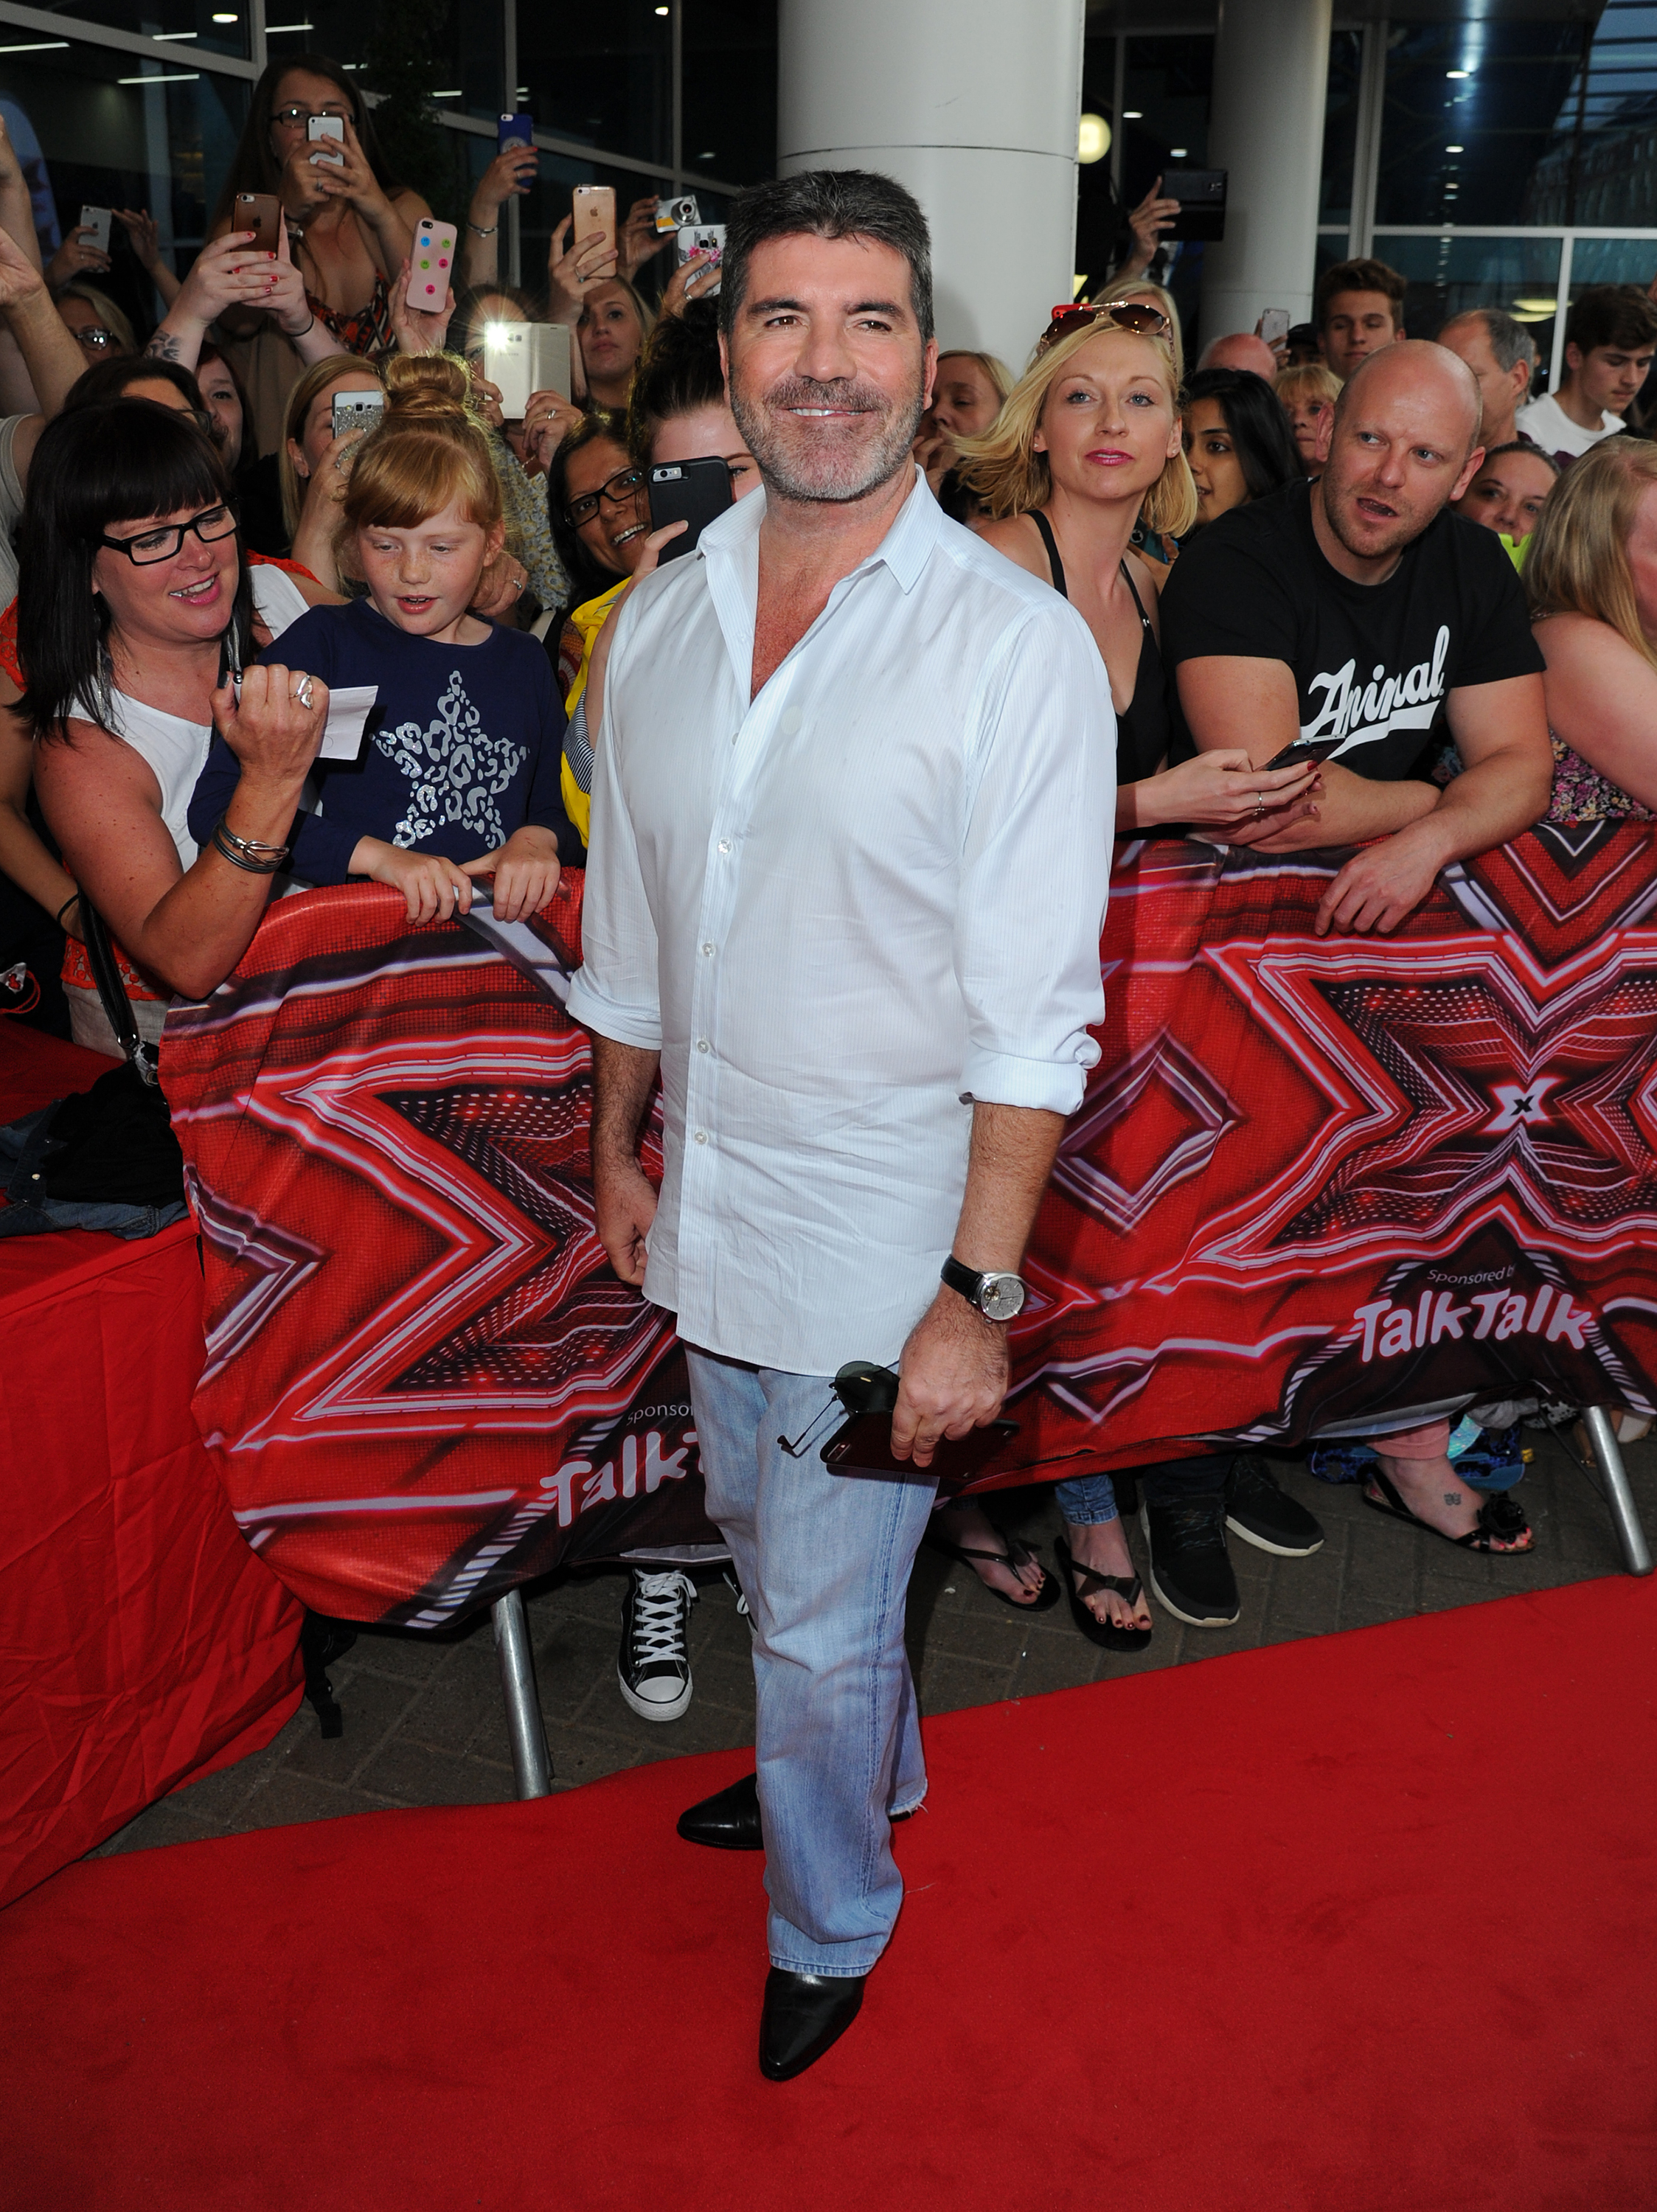 Simon Cowell at X Factor auditions in Leicester, United Kingdom on June 10, 2016 | Source: Getty Images